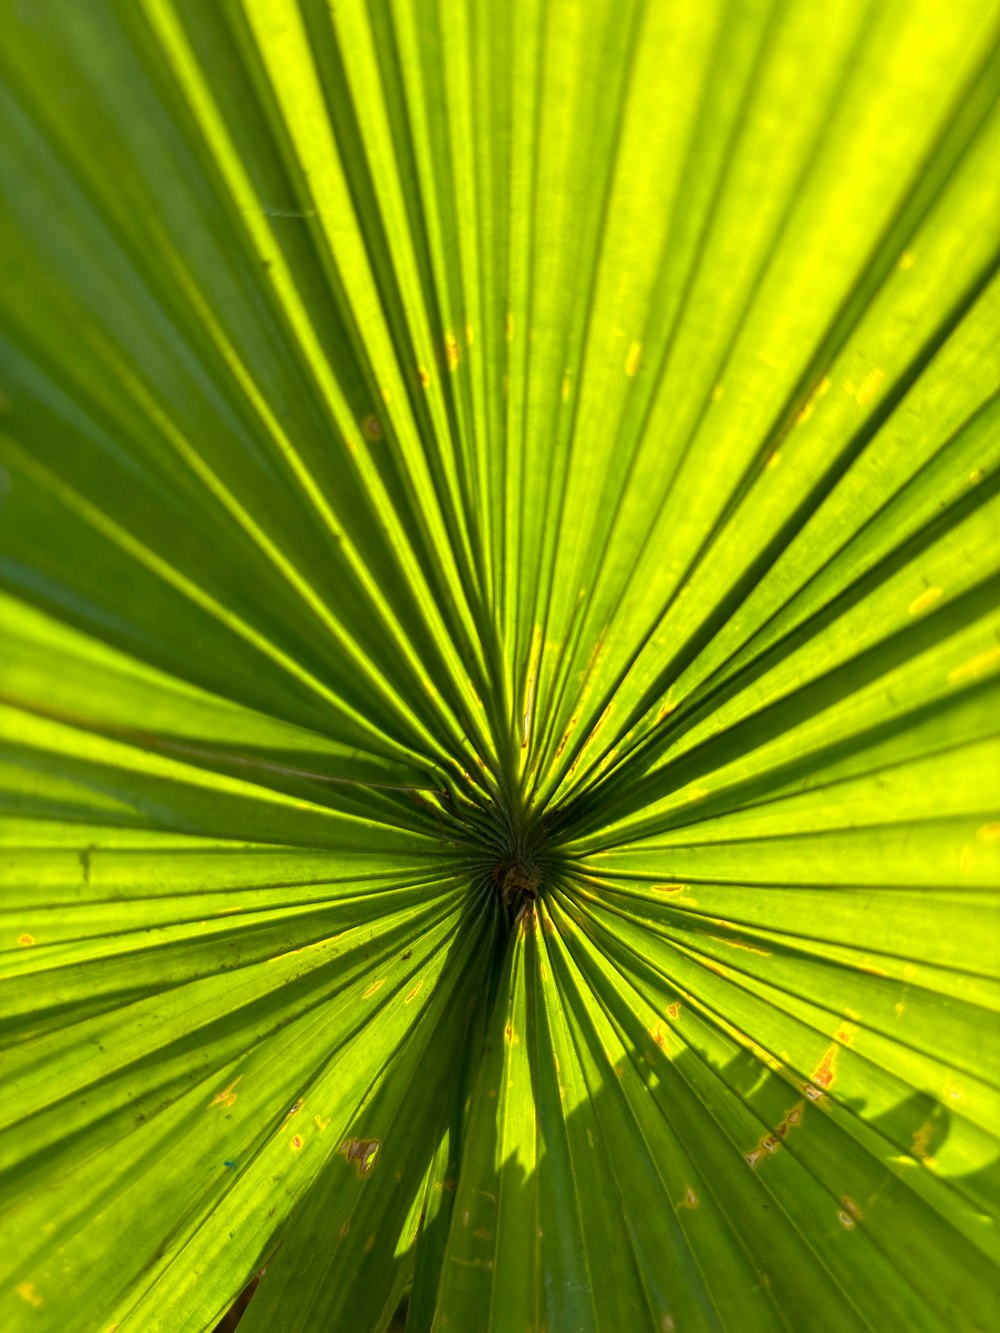 a close up view of a large green leaf